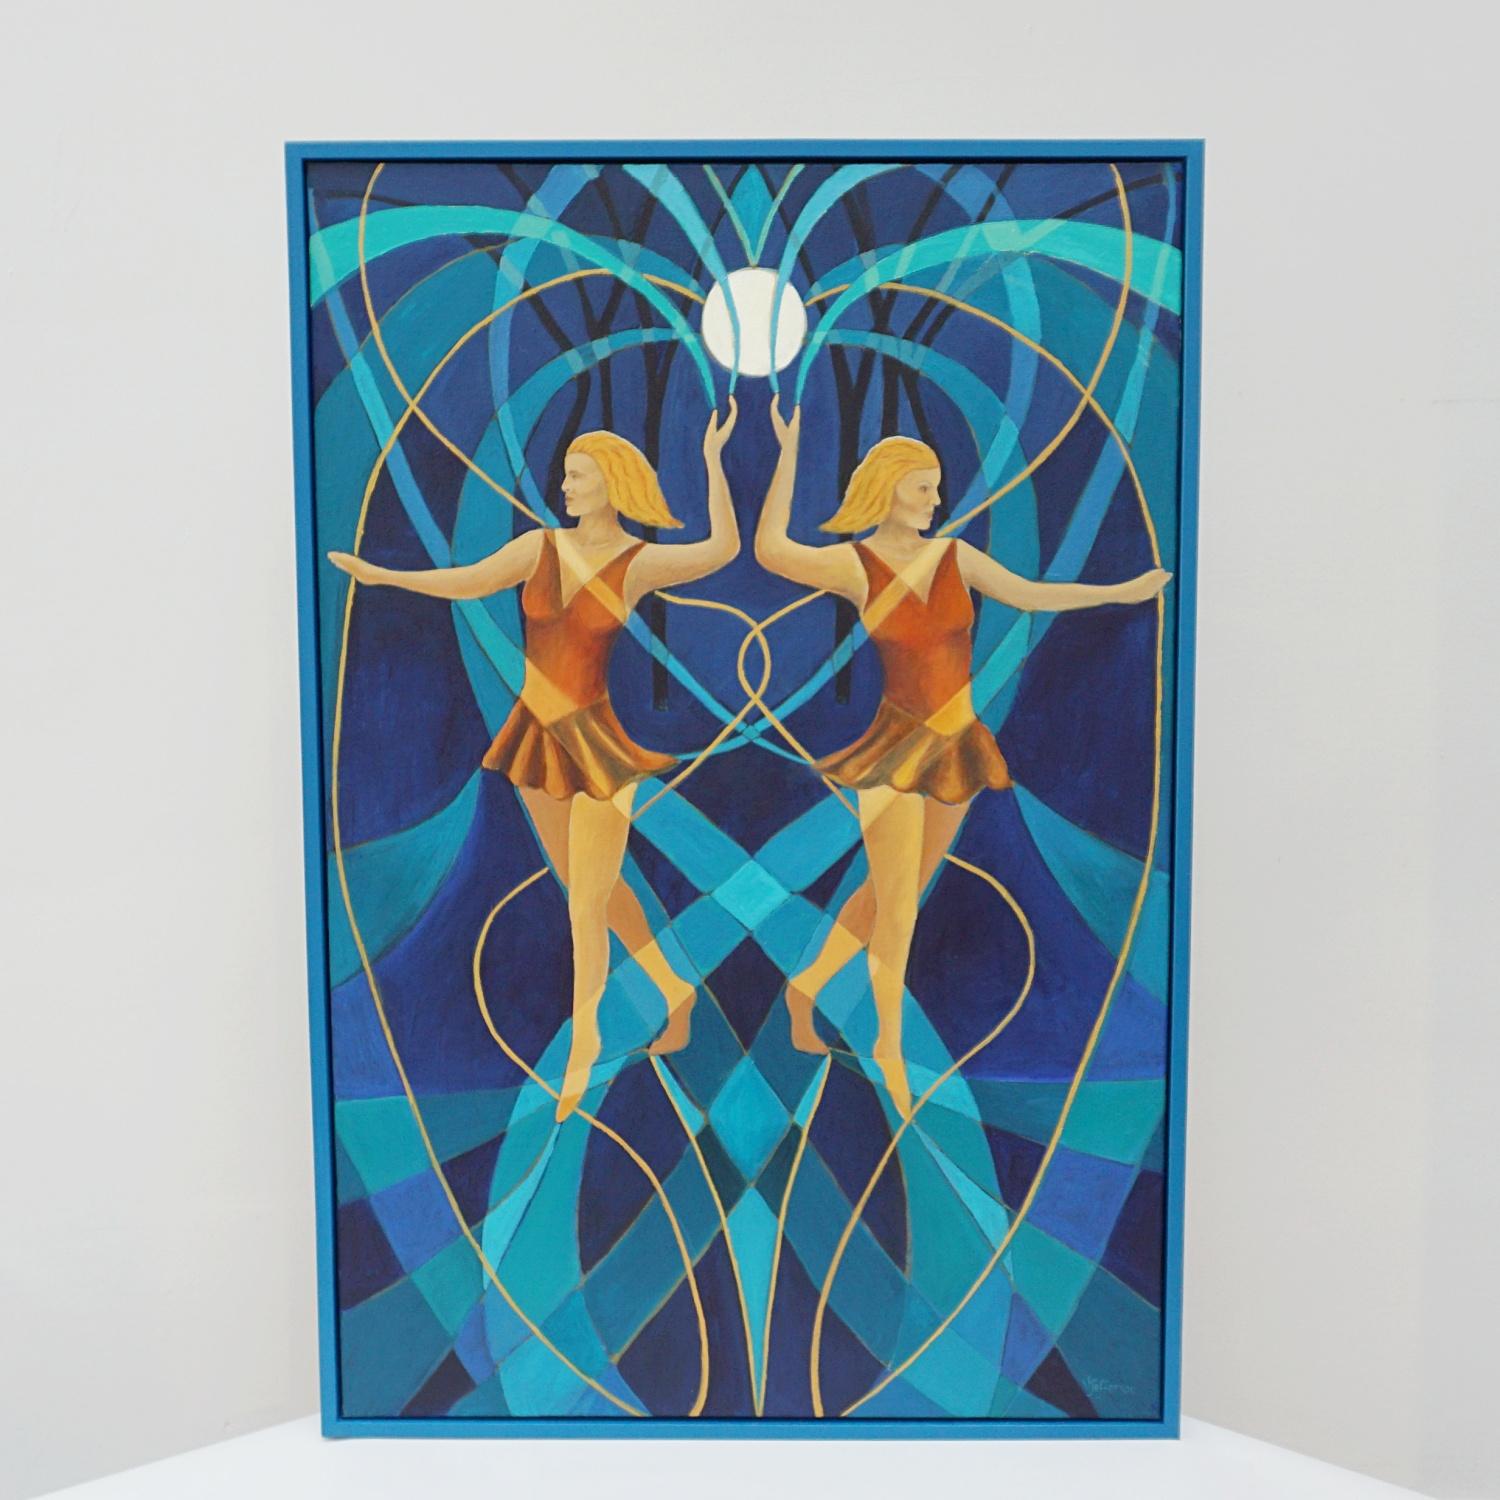 'Midnight Dance' An Art Deco style contemporary painting by Vera Jefferson. Oil on canvas, depicting two dancers twirling ribbons in the moonlight. Painted amongst a stylised, abstract background. Signed V Jefferson to lower right. 

Dimensions: H